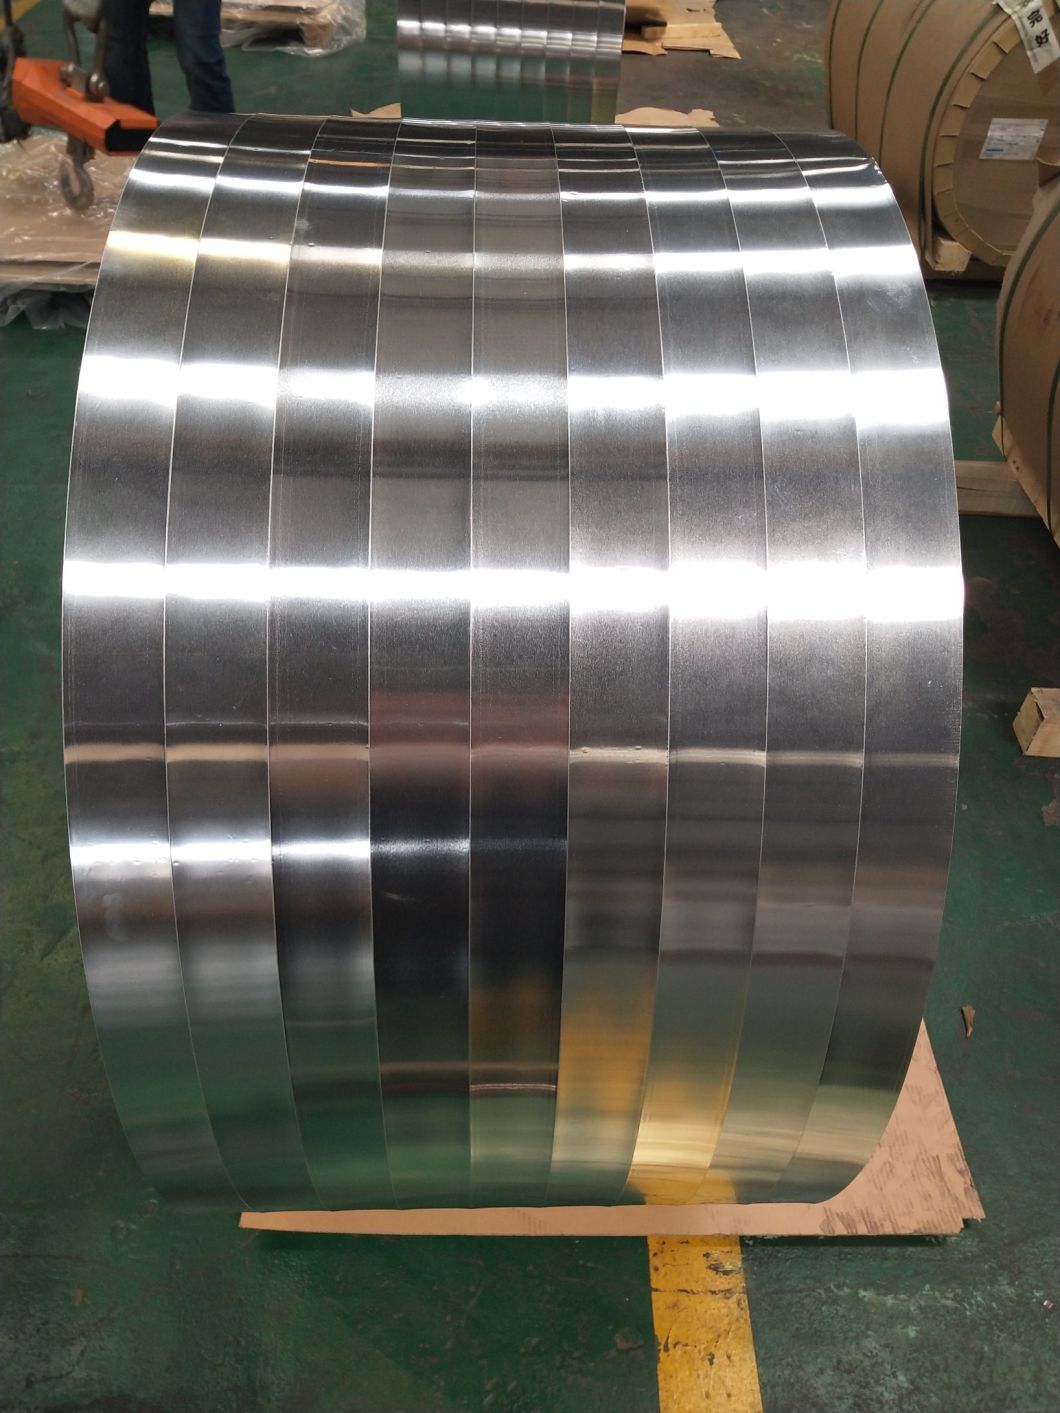 Aluminum Alloy Strip for Keyboard, Chassis and Cabinets Stock